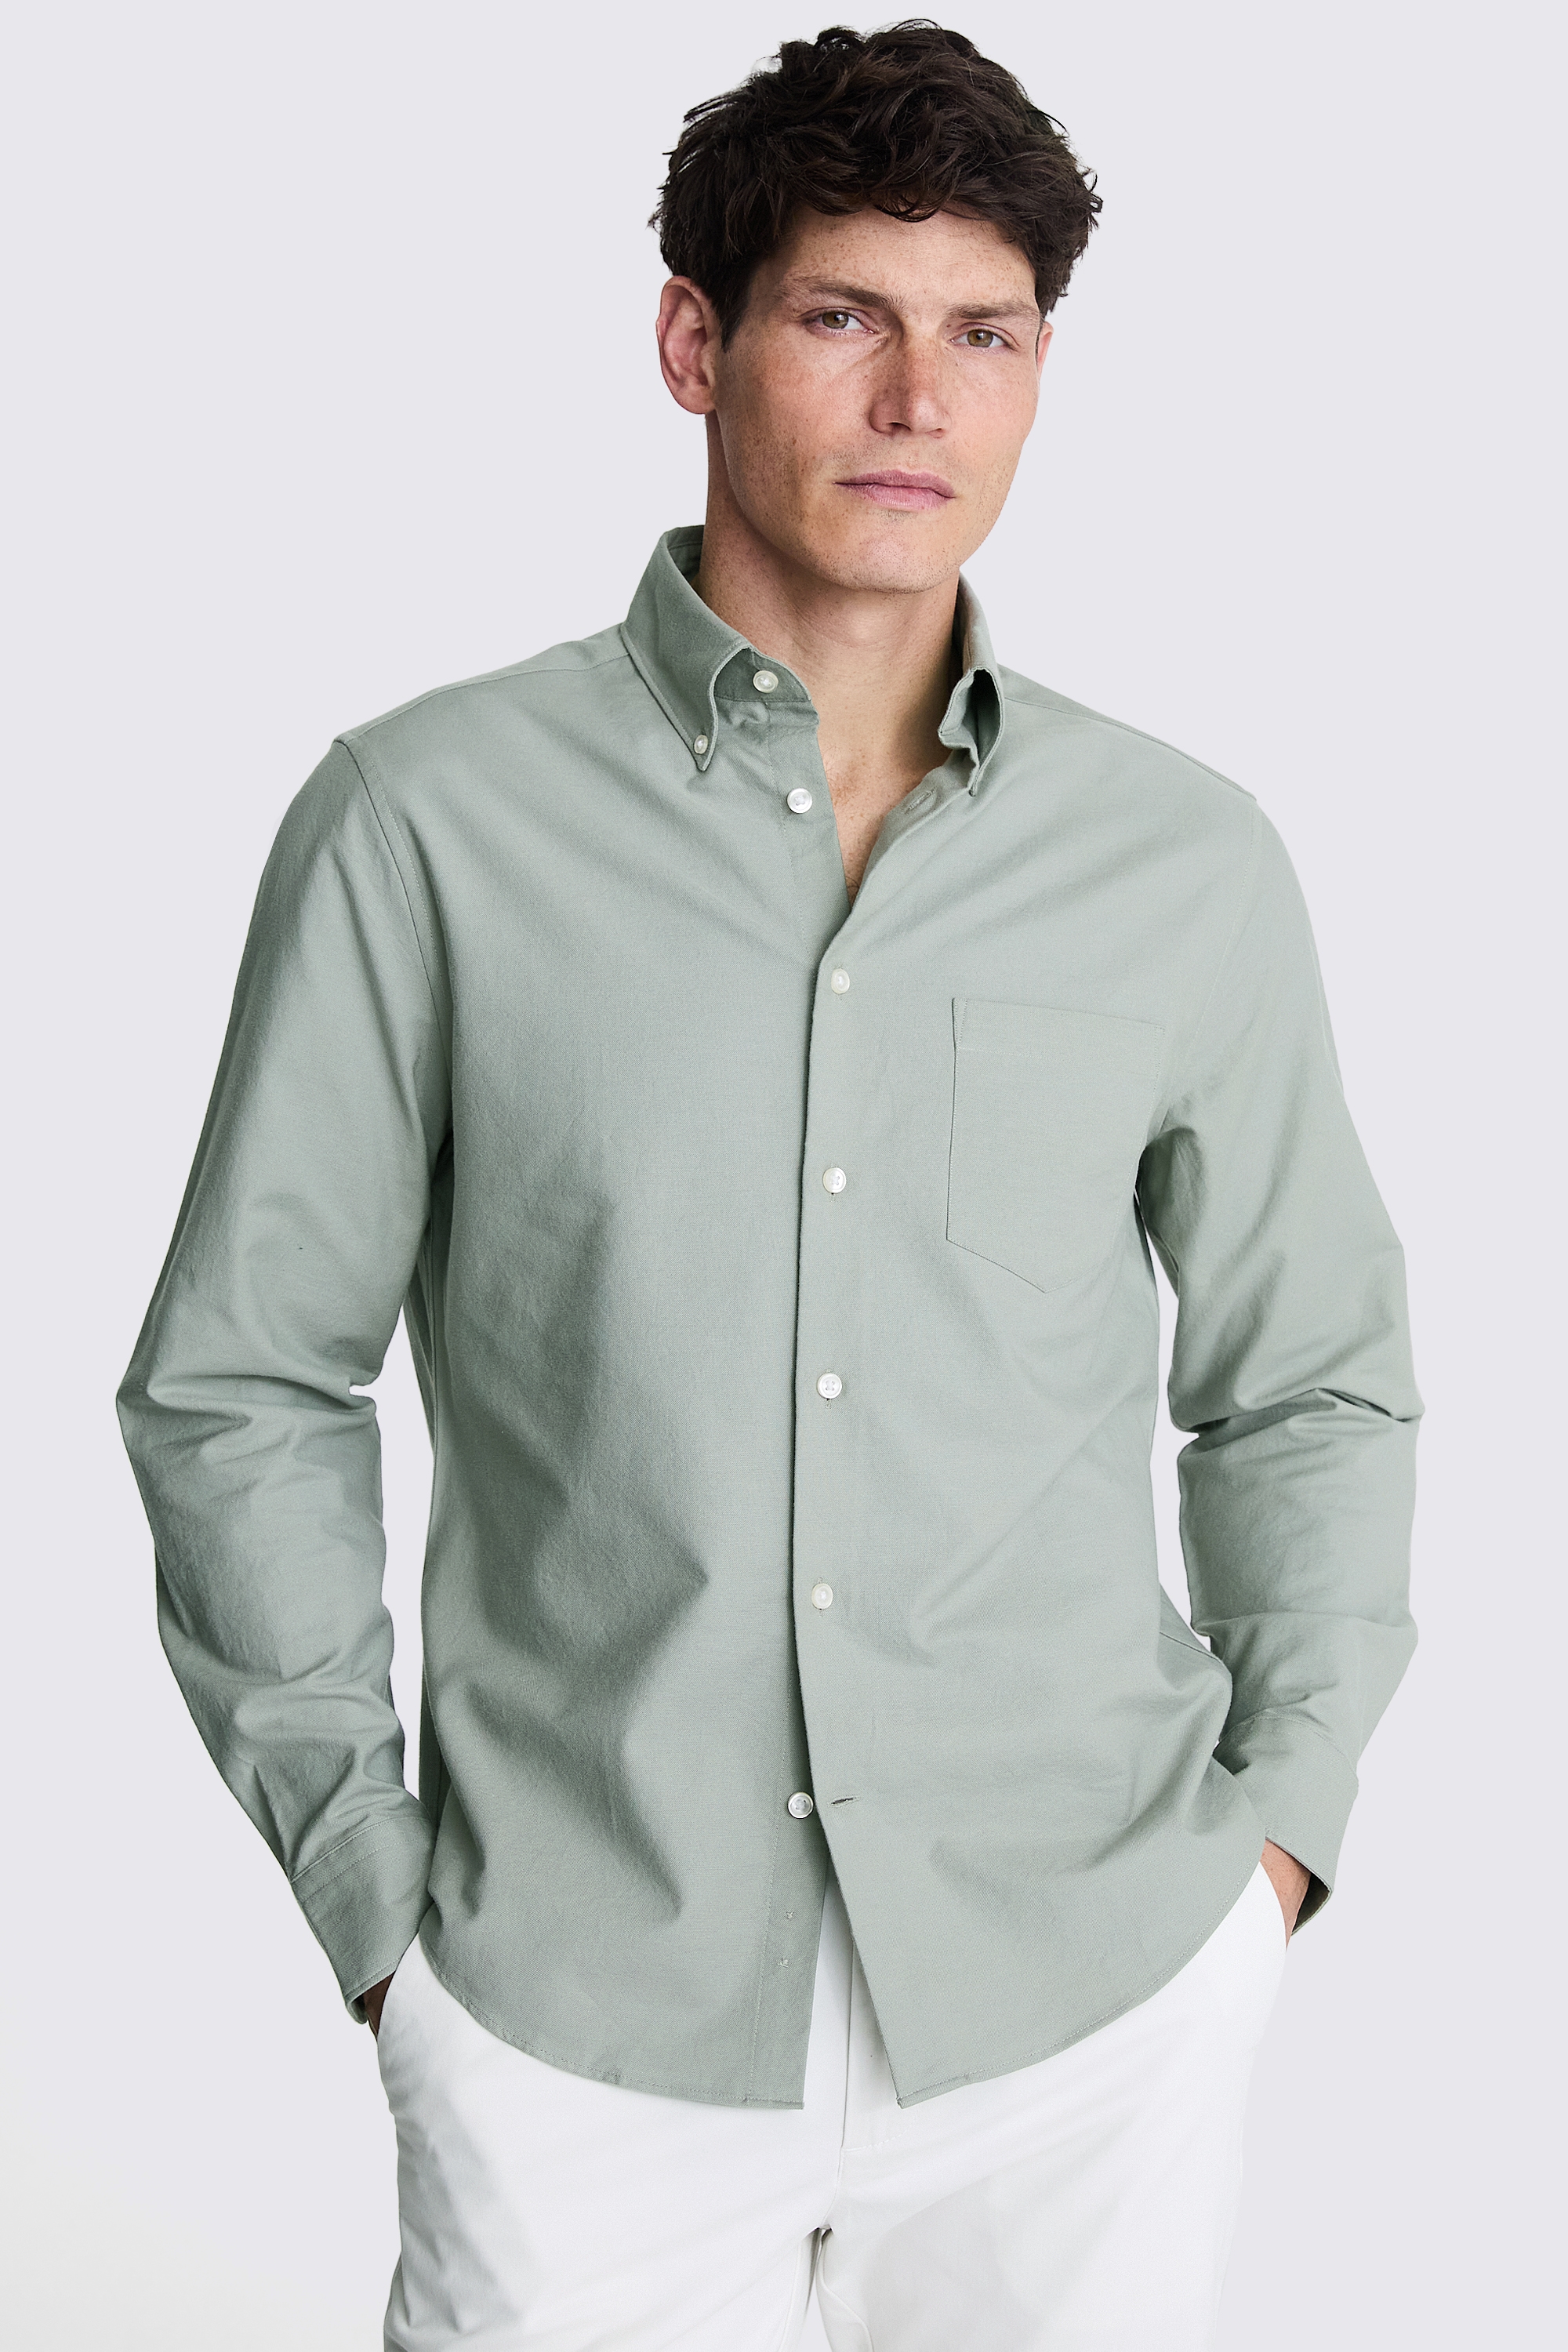 Sage Washed Oxford Shirt | Buy Online at Moss